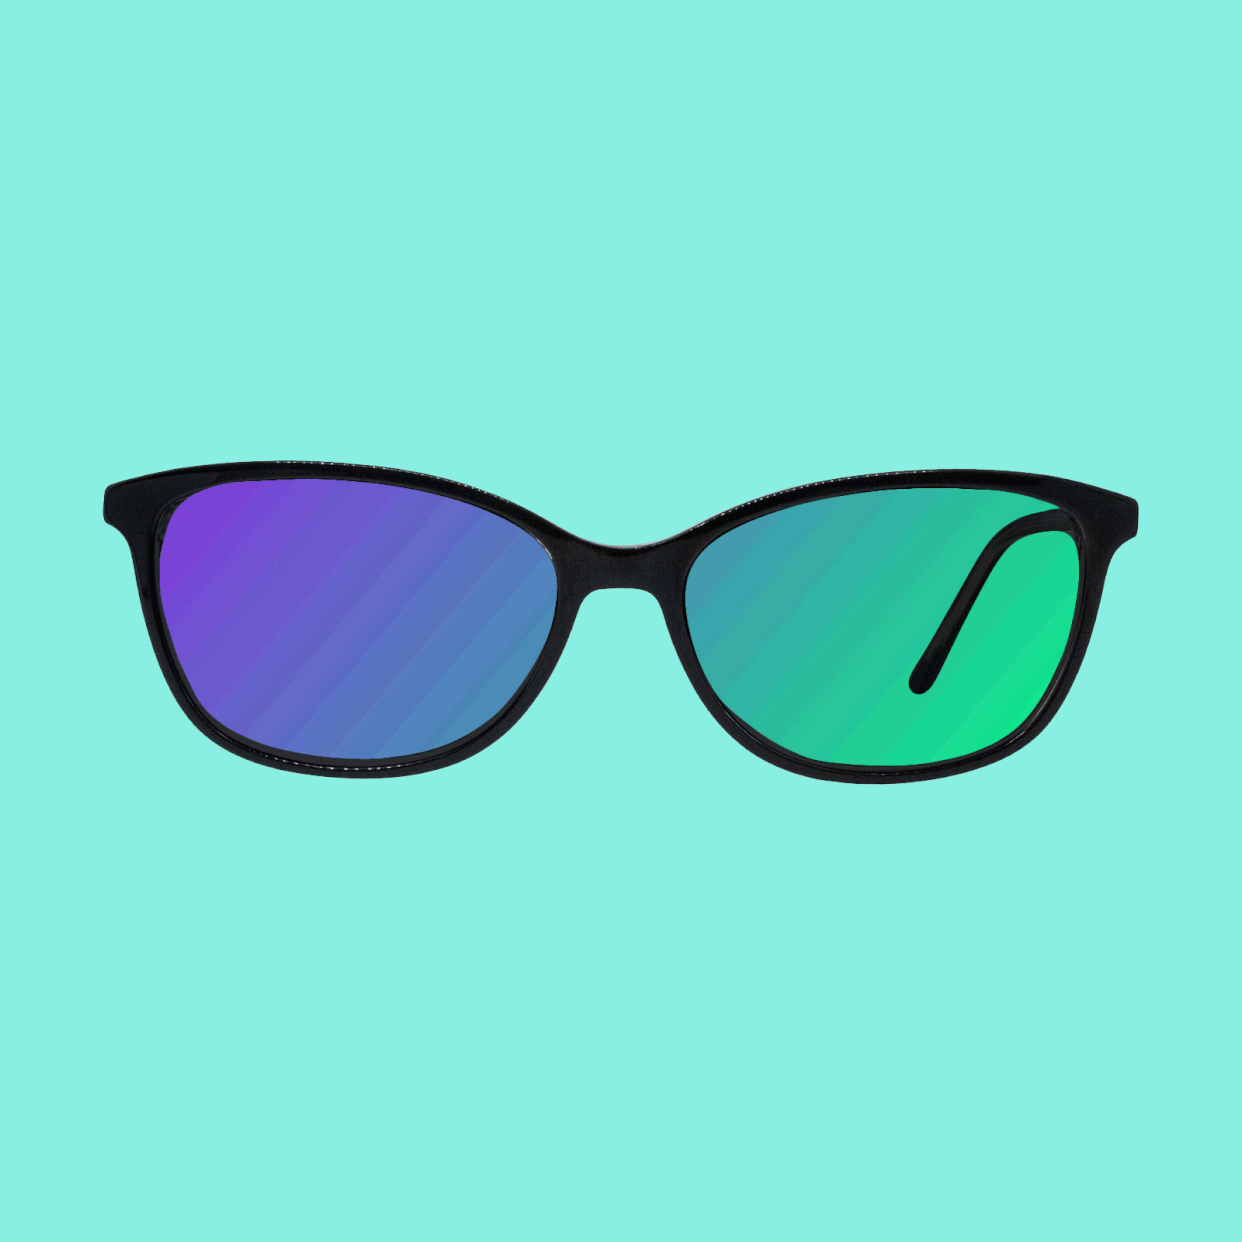 Animation of sunglasses with light passing through them